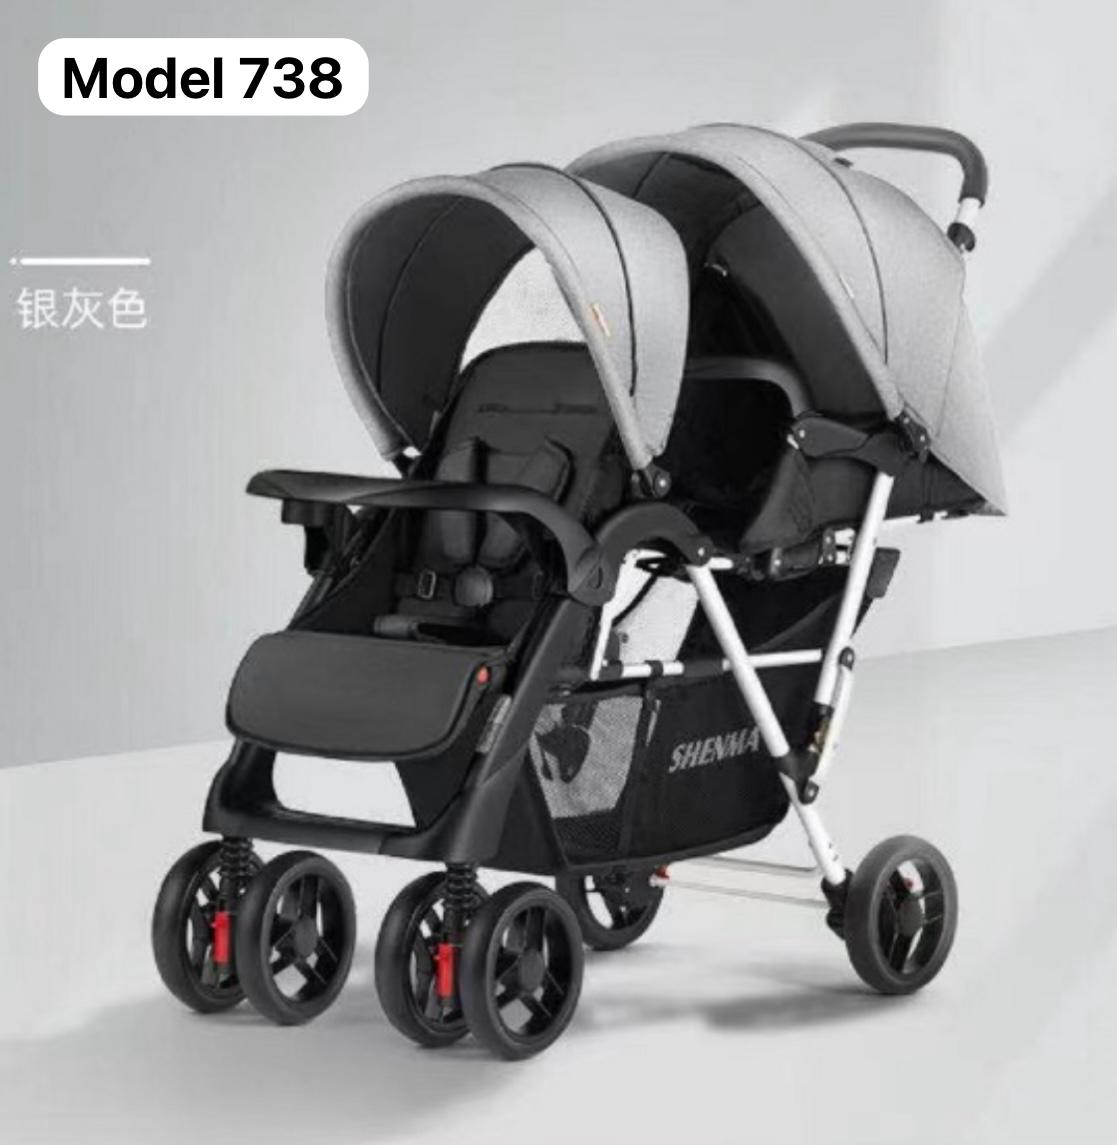 Big Size Foldable Twin Baby Stroller for Baby & Kids - Effortlessly Accommodating Two with Lightness